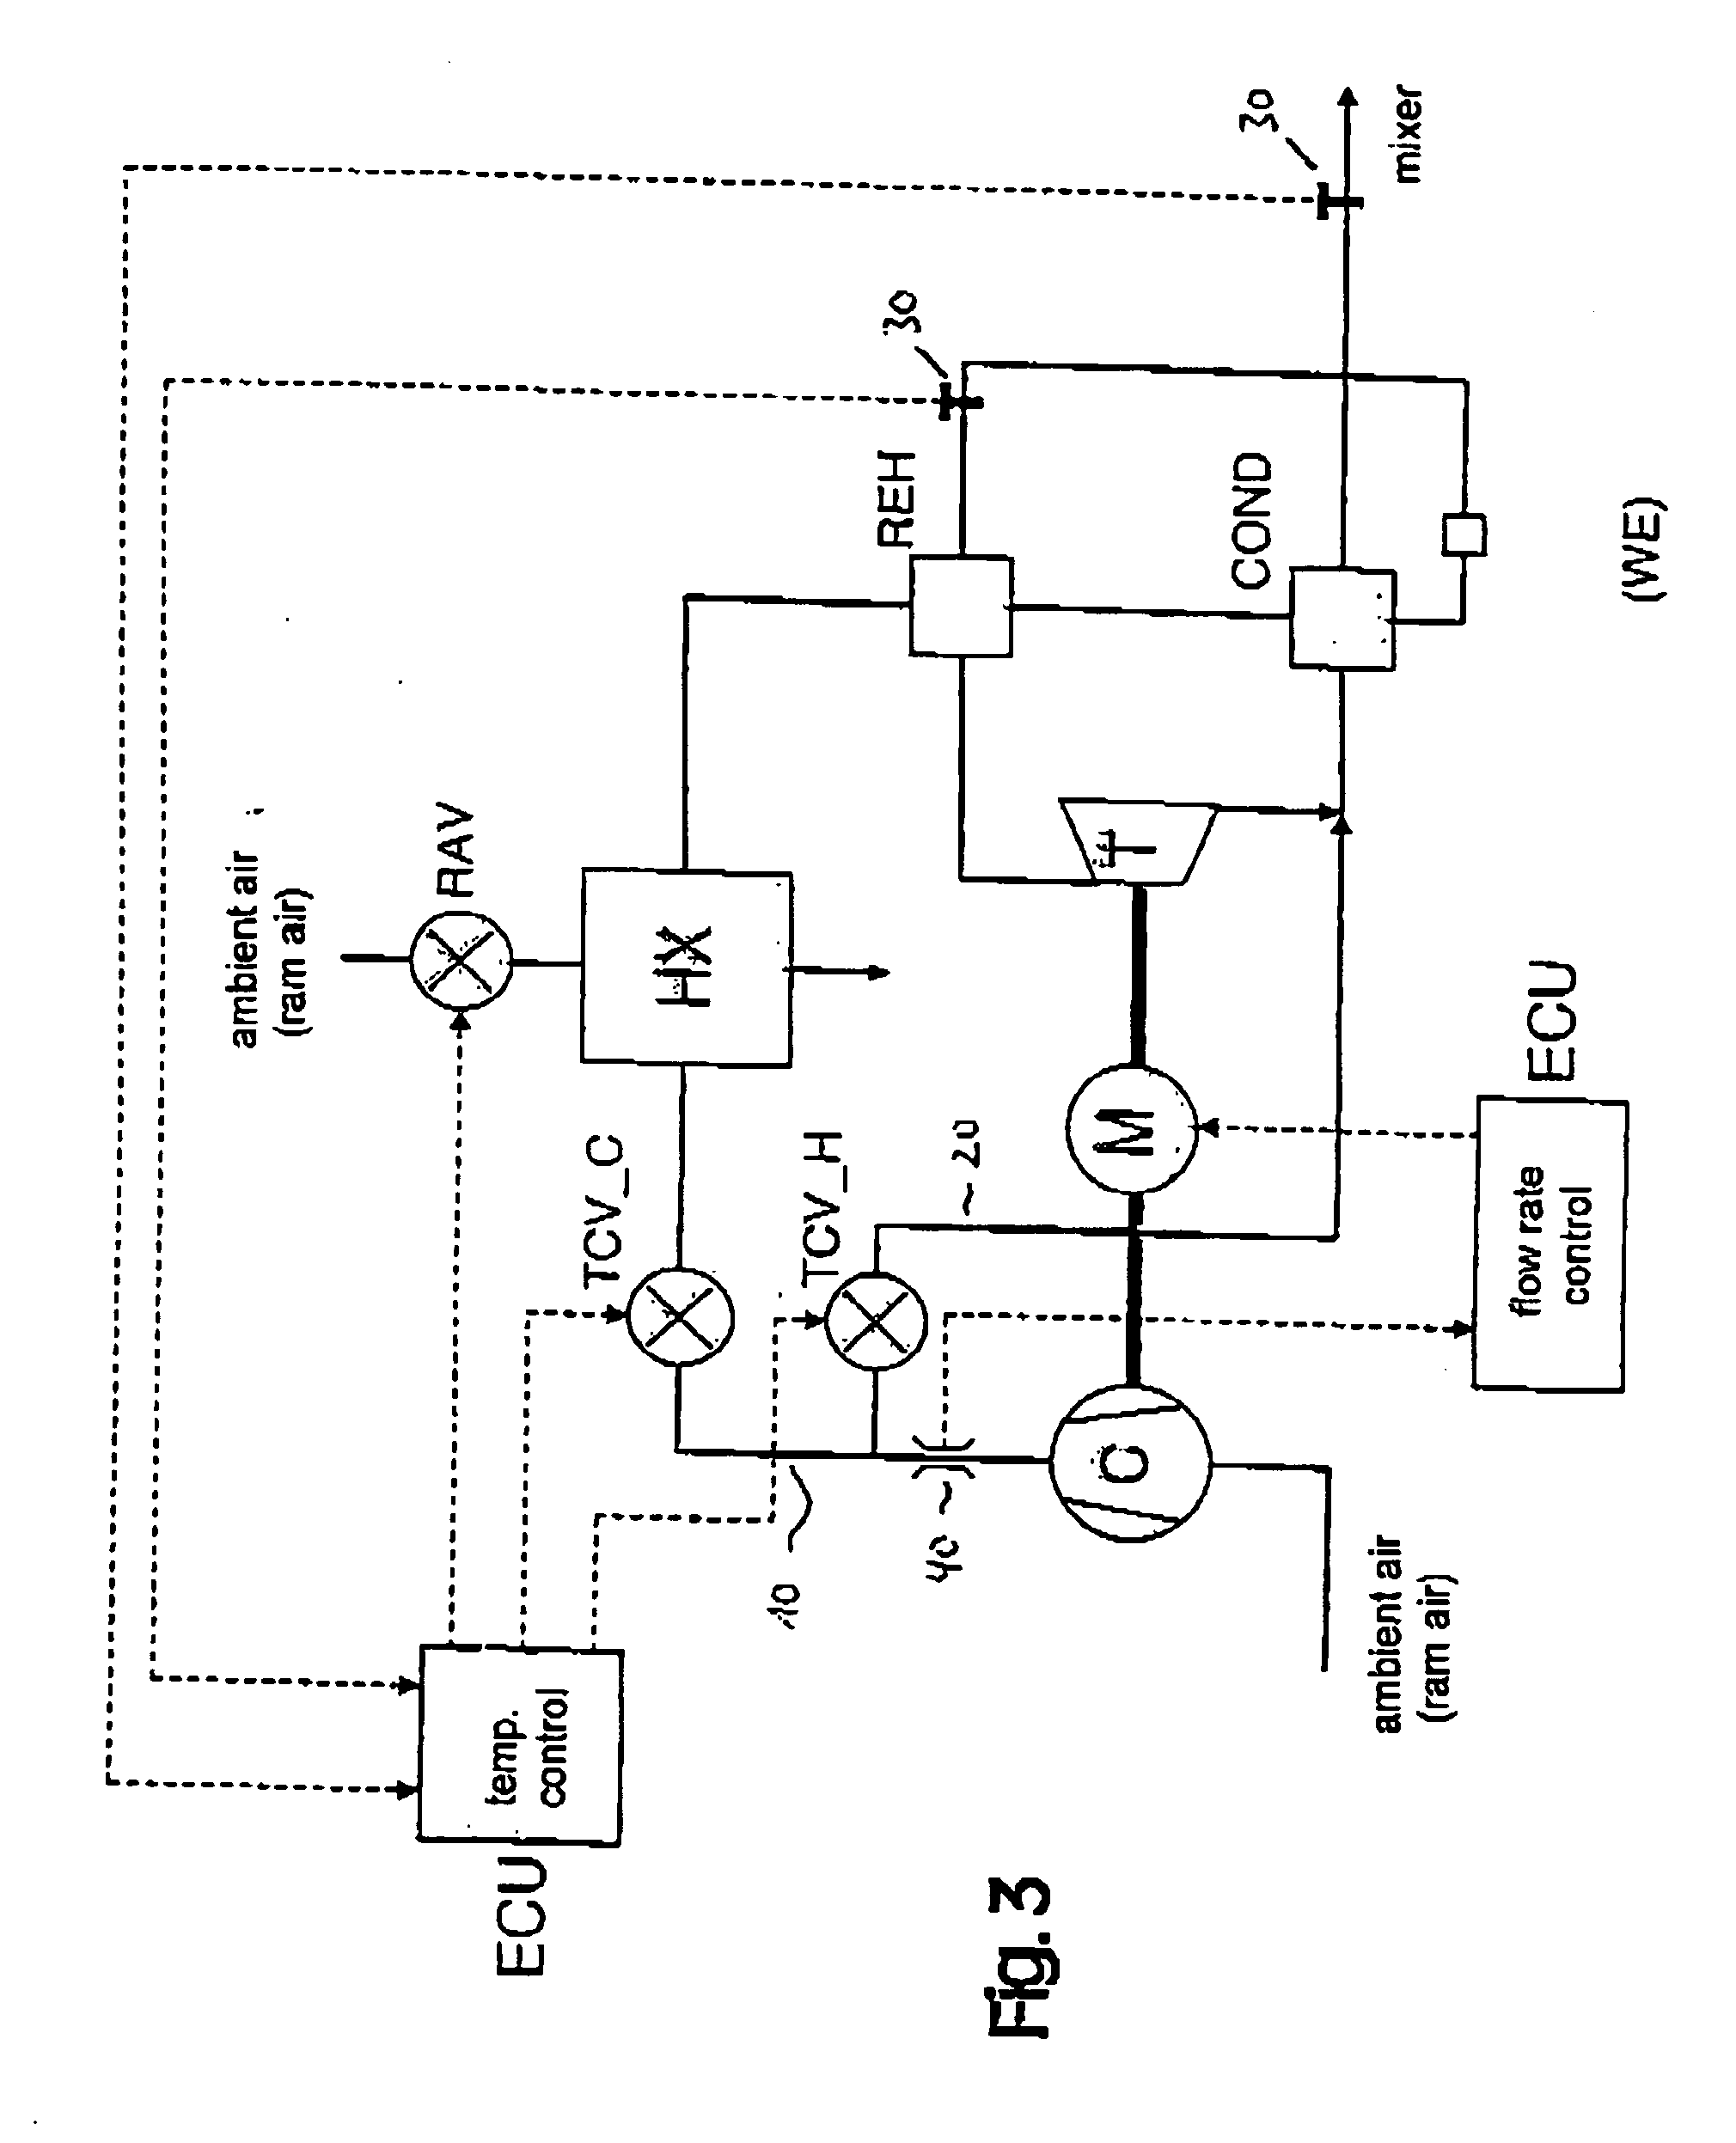 Aircraft air conditioning system and method of operating an aircraft air conditioning system